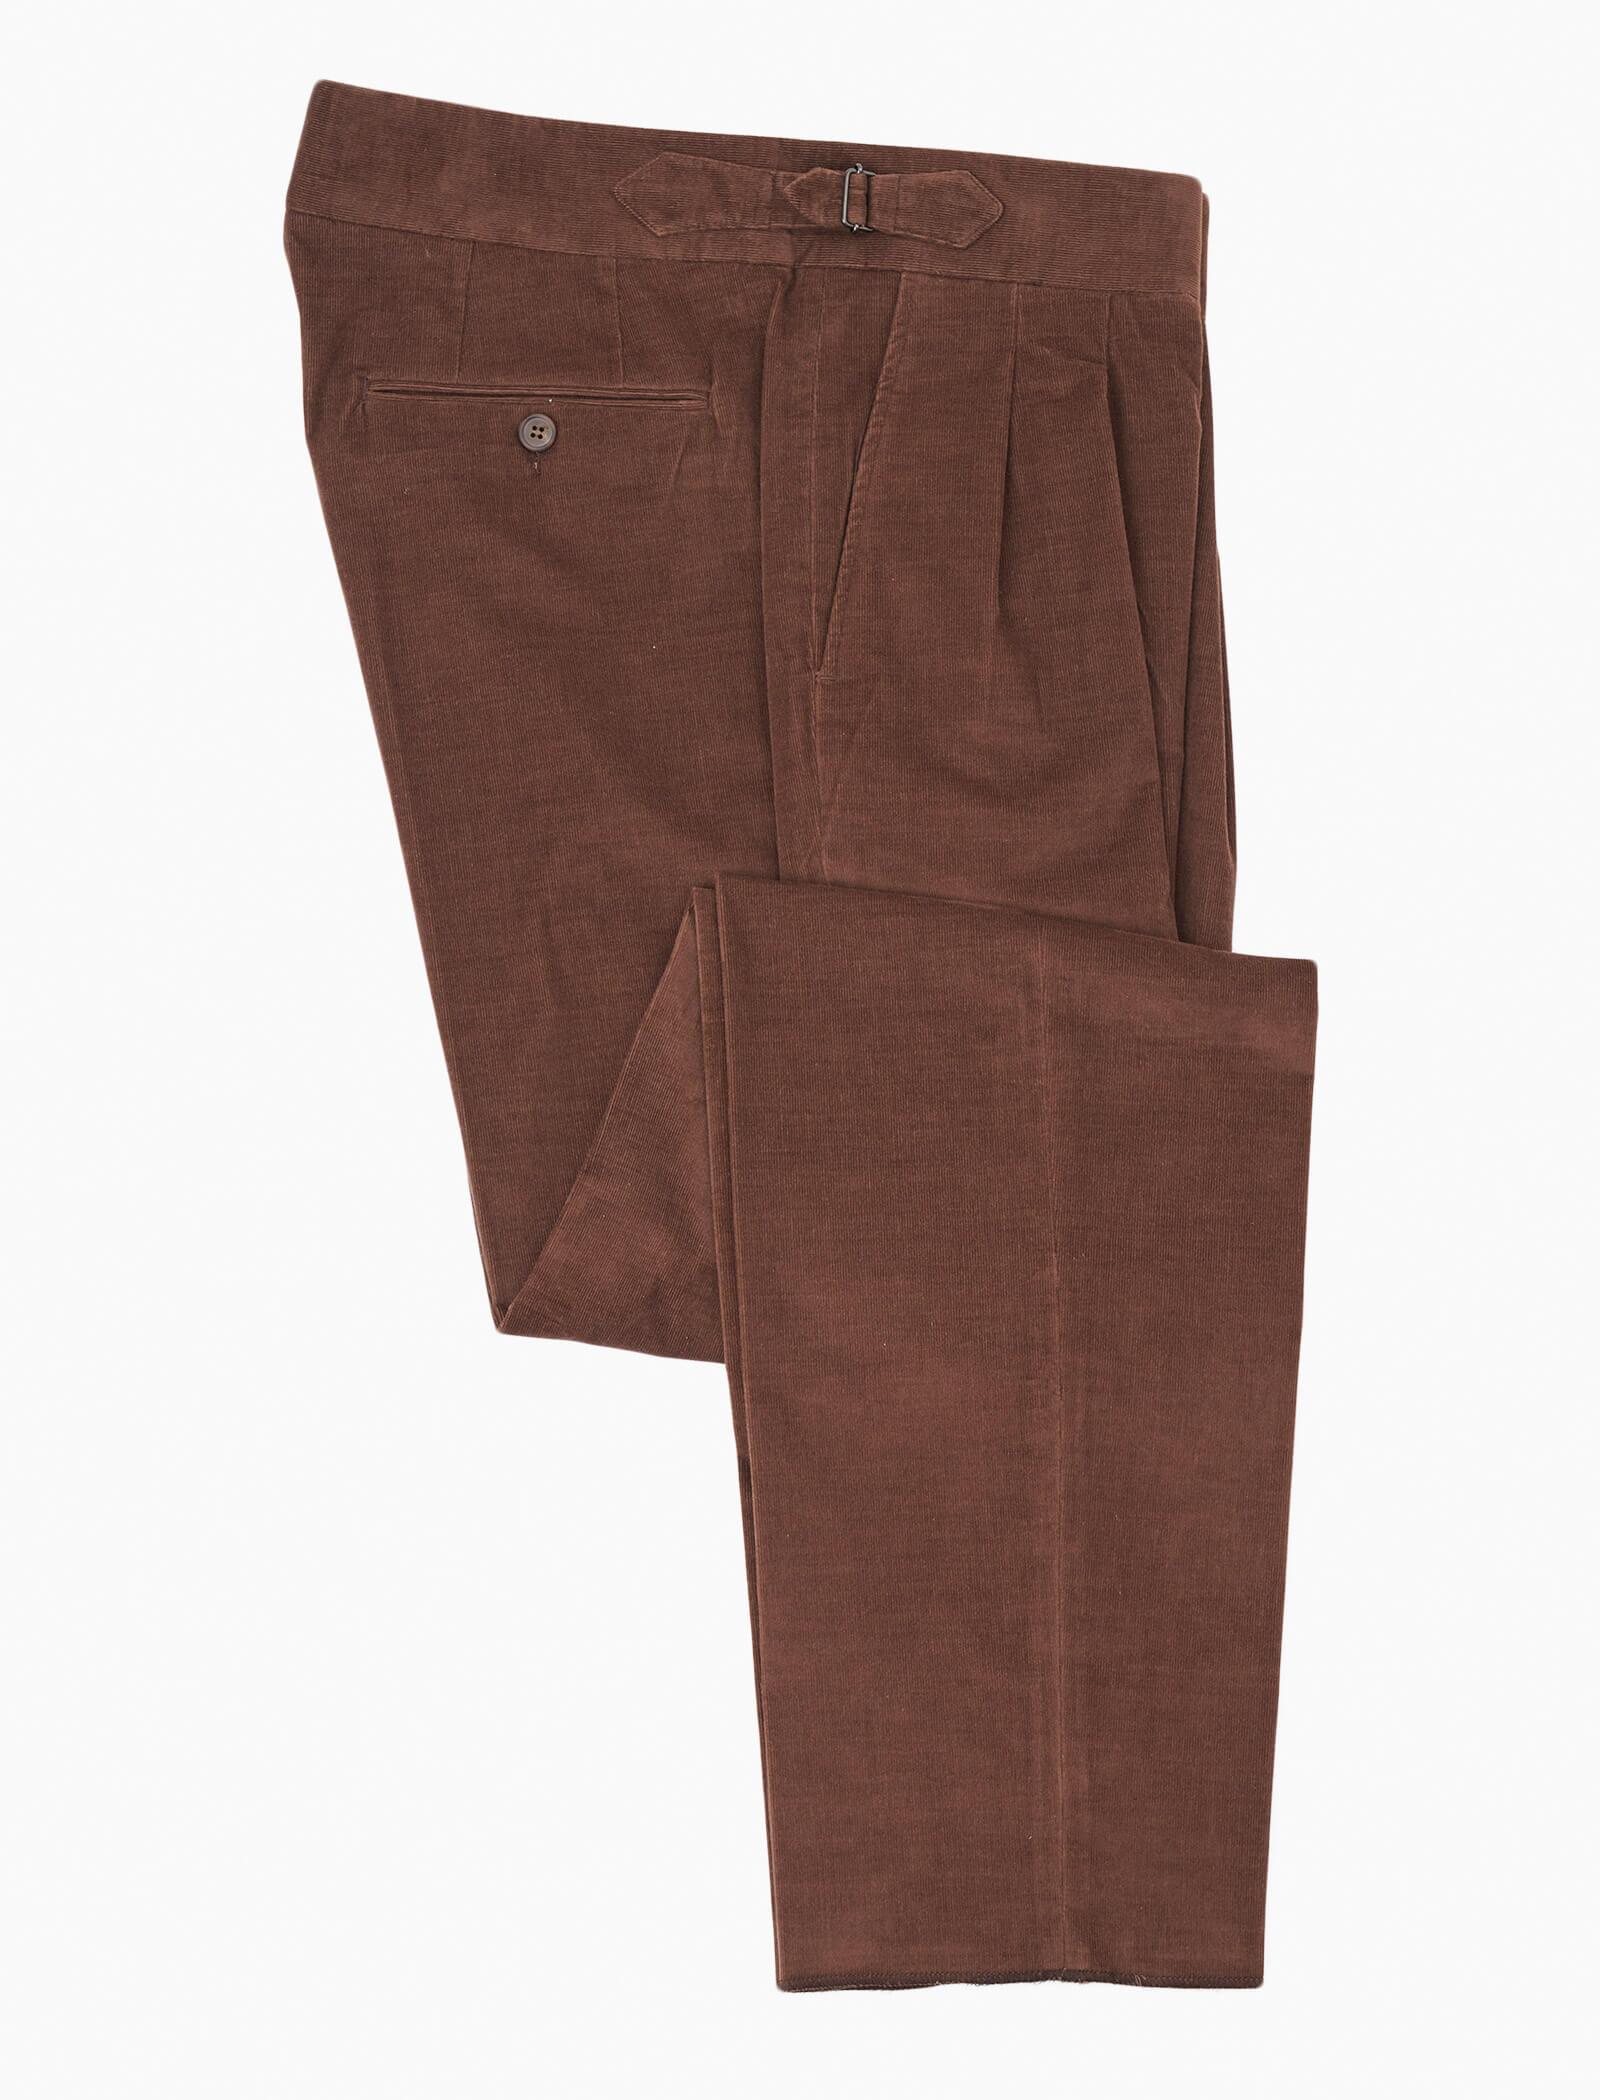 Men's High-waisted Trousers Belted Pants Pure color Western Summer Party  Casual | eBay